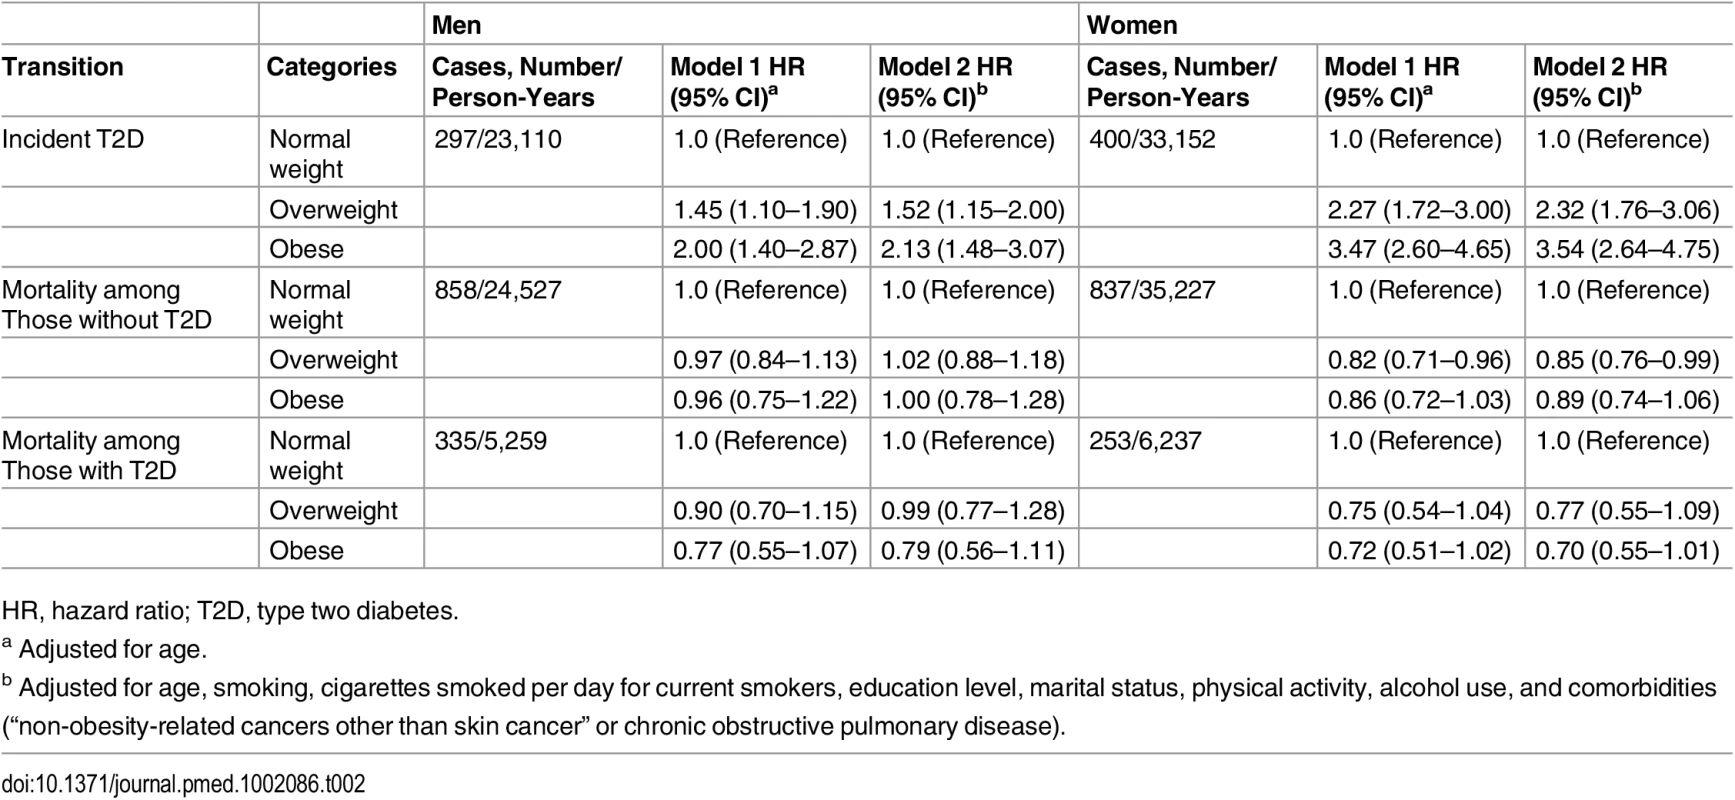 Hazard ratios for incidence diabetes and death in overweight and obese men and women.